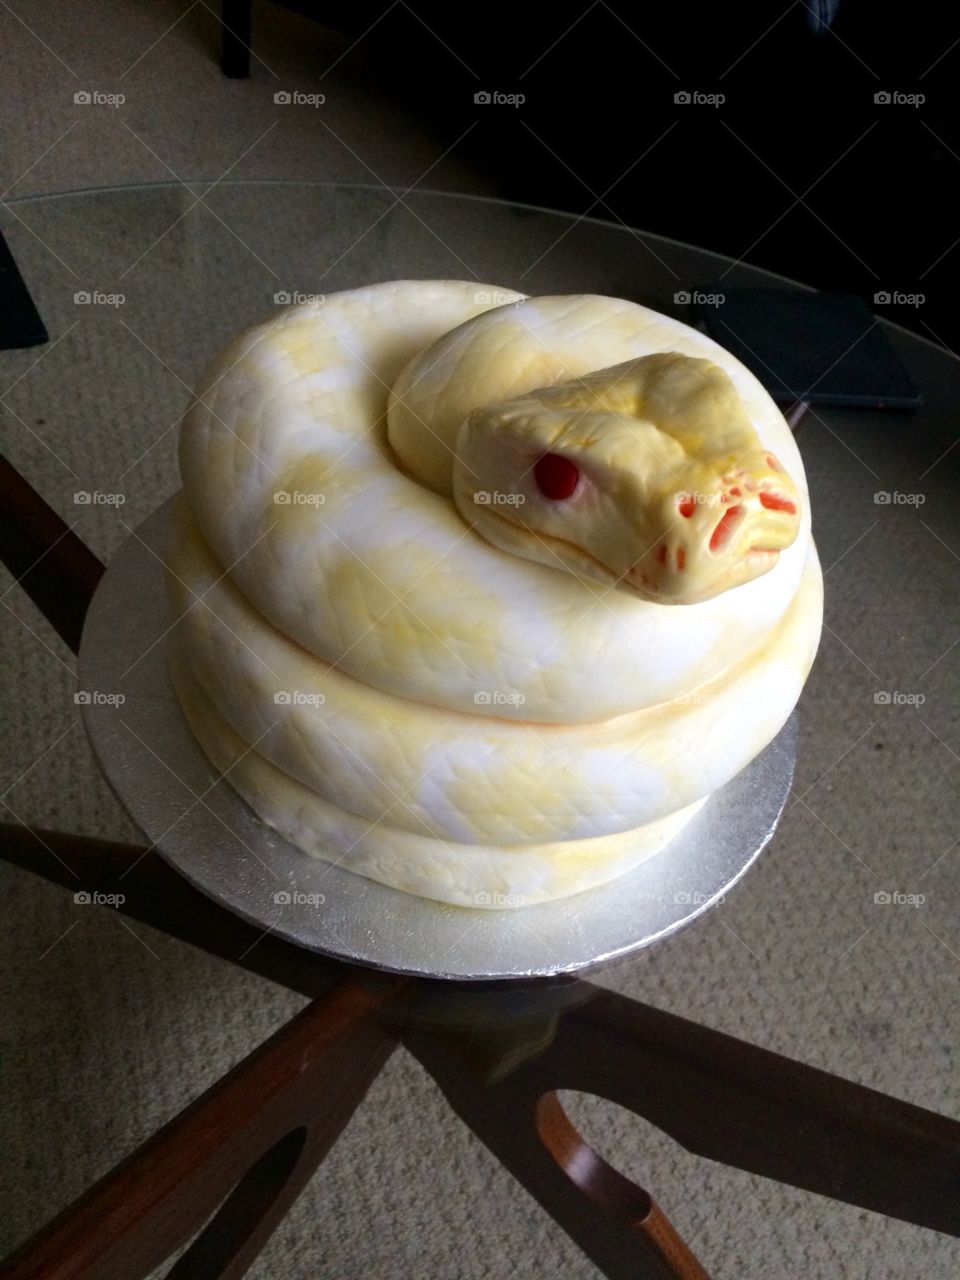 Realistic Snake cake - made by me